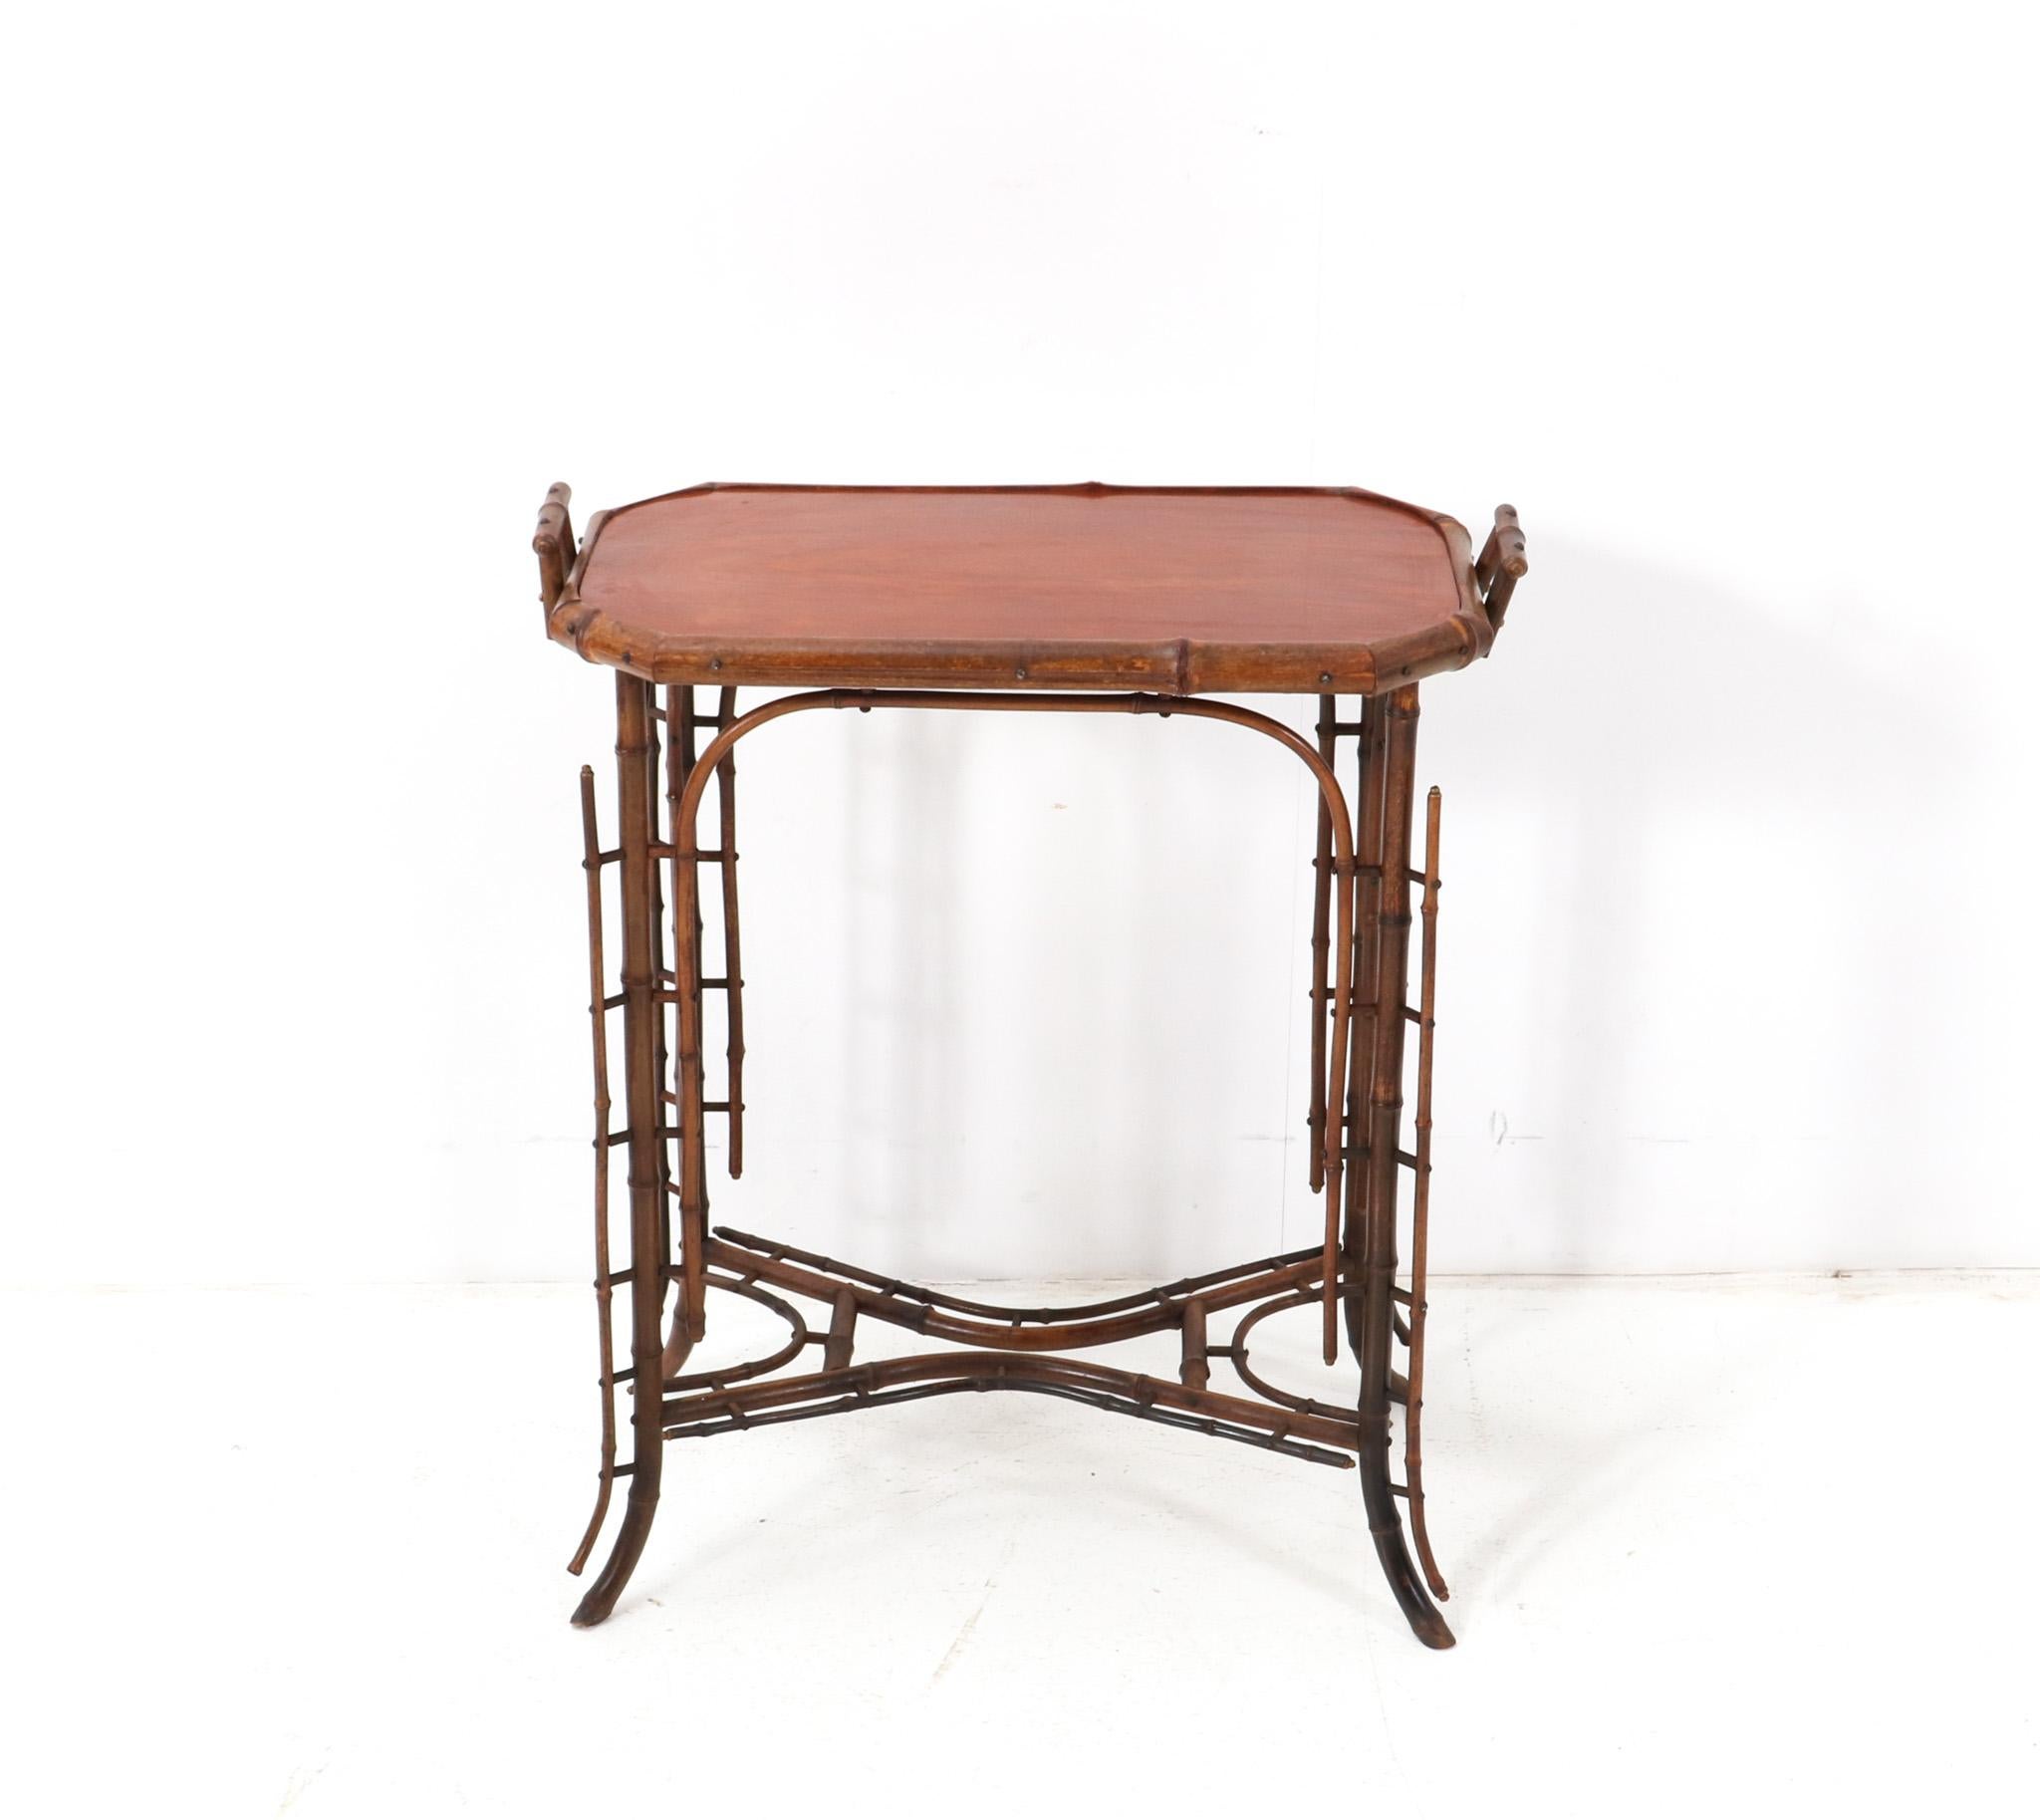 Stunning and rare Art Nouveau tea table.
Striking Dutch design from the 1900s.
Original bamboo frame with solid padouk top.
This wonderful Art Nouveau tea table is in very good condition with minor wear consistent with age and use, preserving a